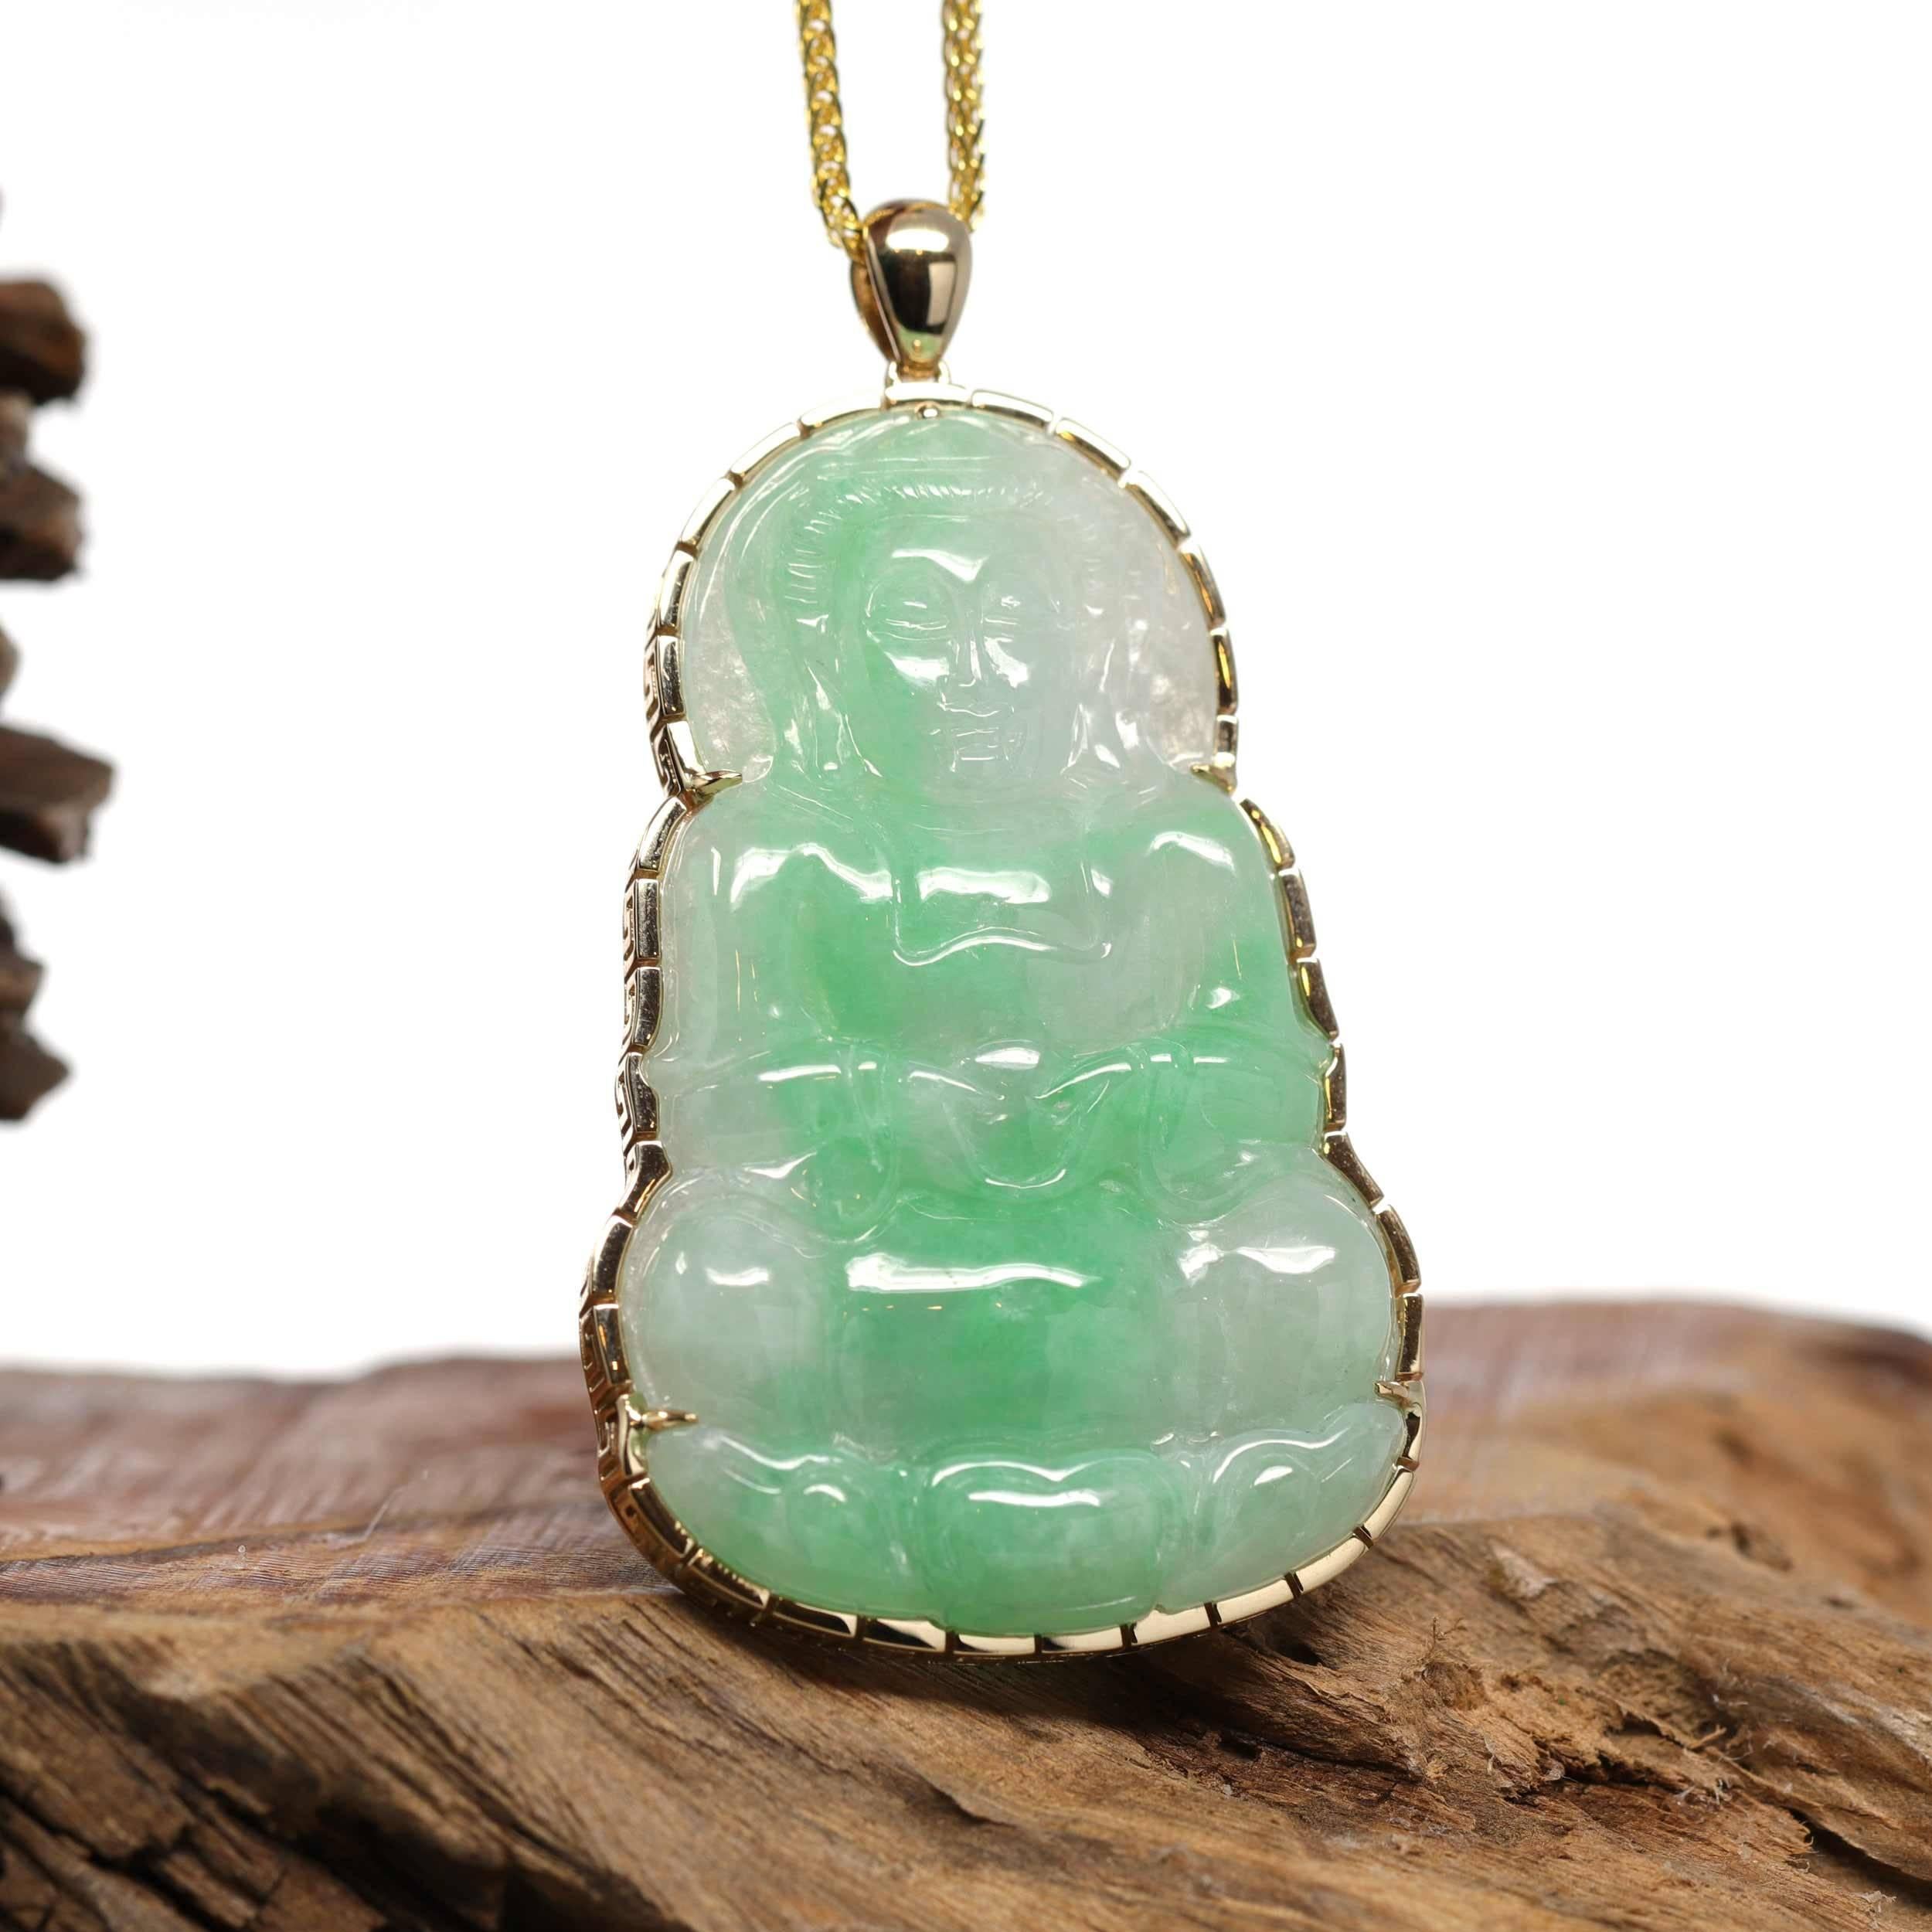 what does jade symbolize